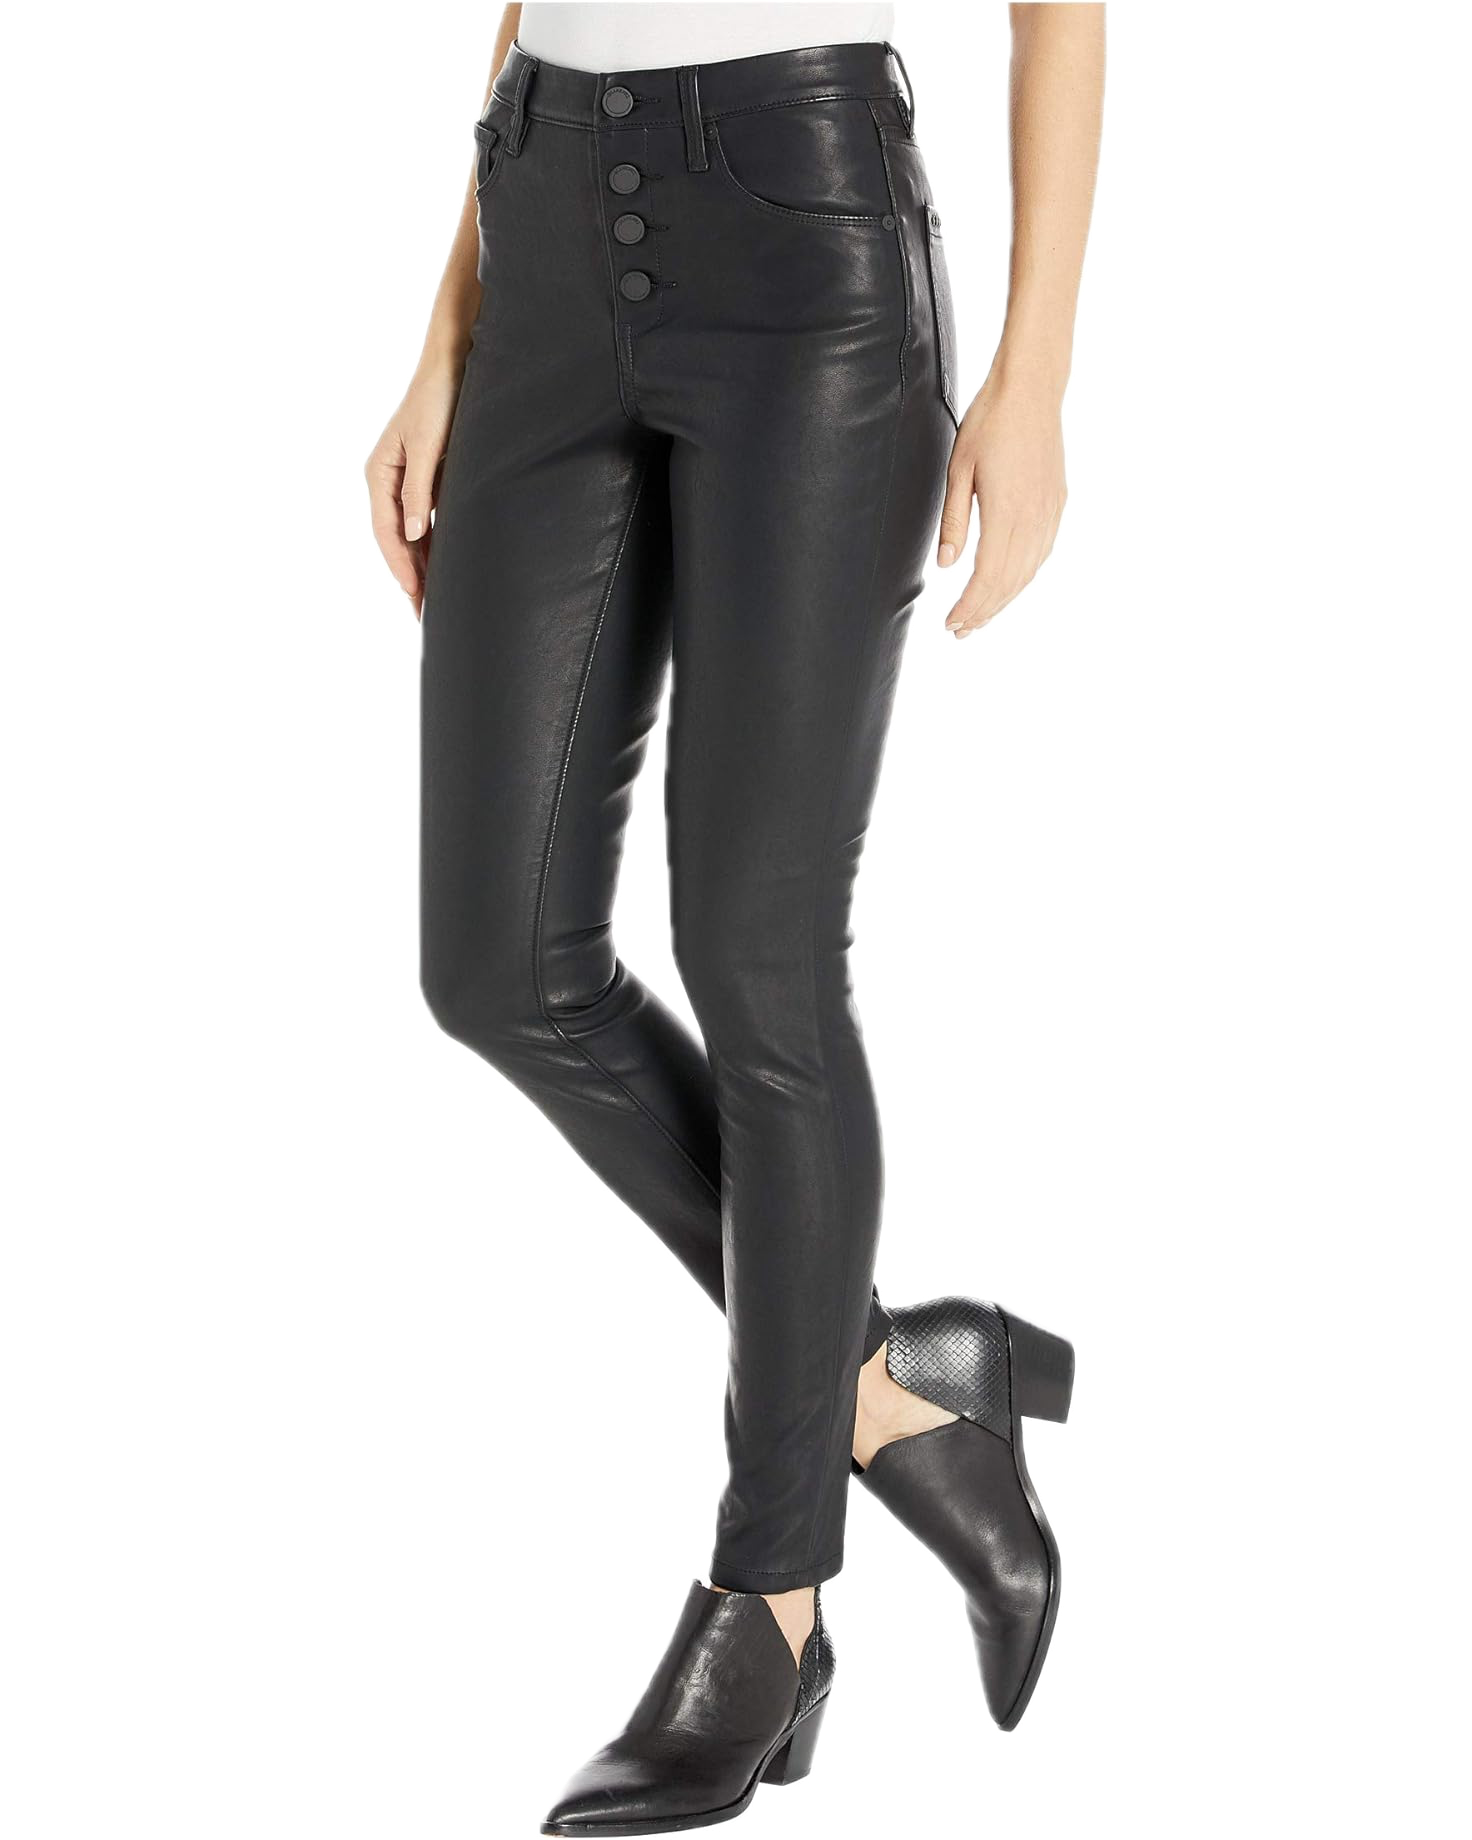 Faux Leather Skinny Jeans